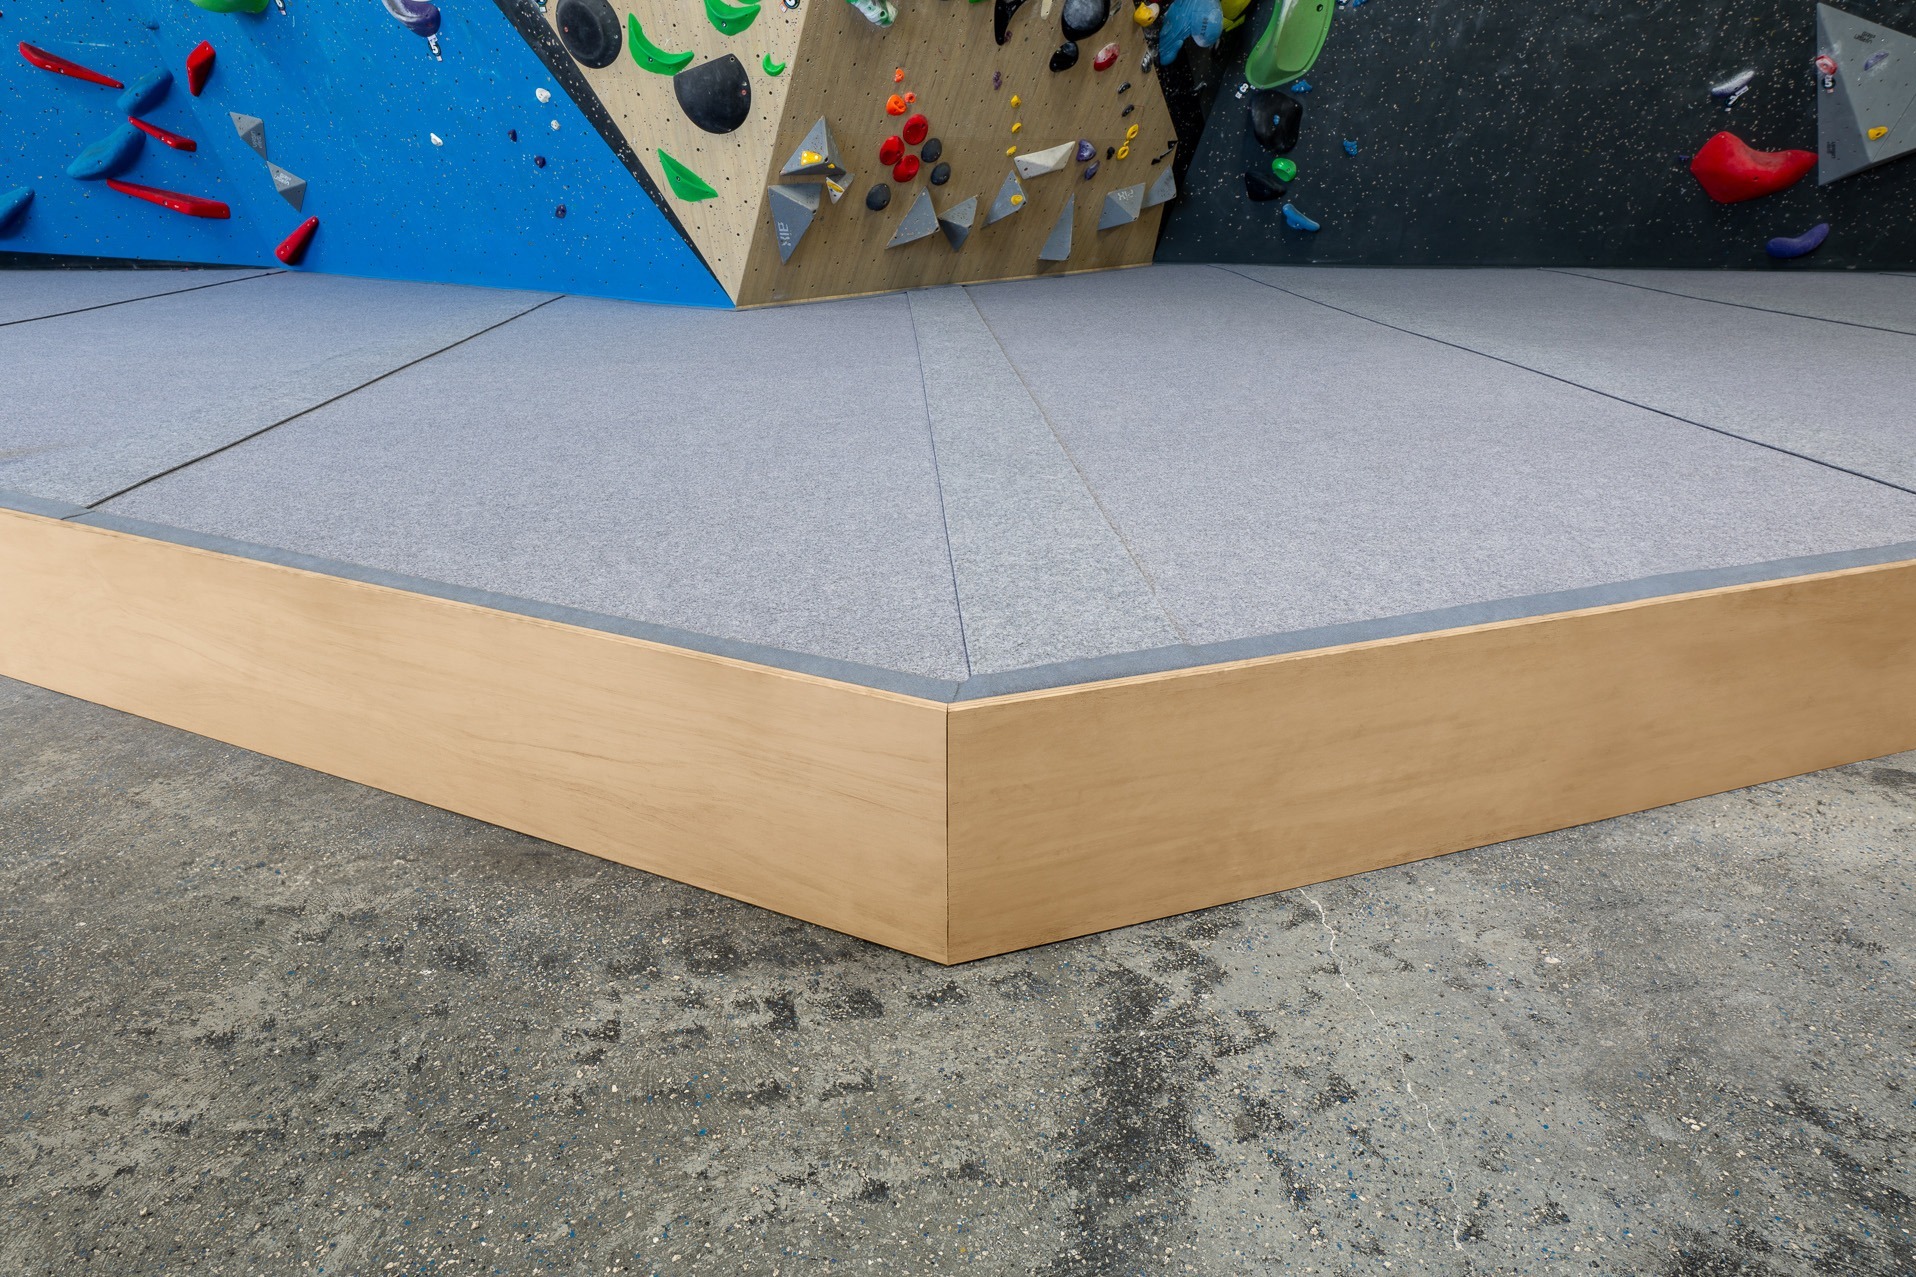 Climb ICP's signature grey carpeted climbing mats surrounded by a high quality timber trim. The mats are located below a colourful climbing wall. 